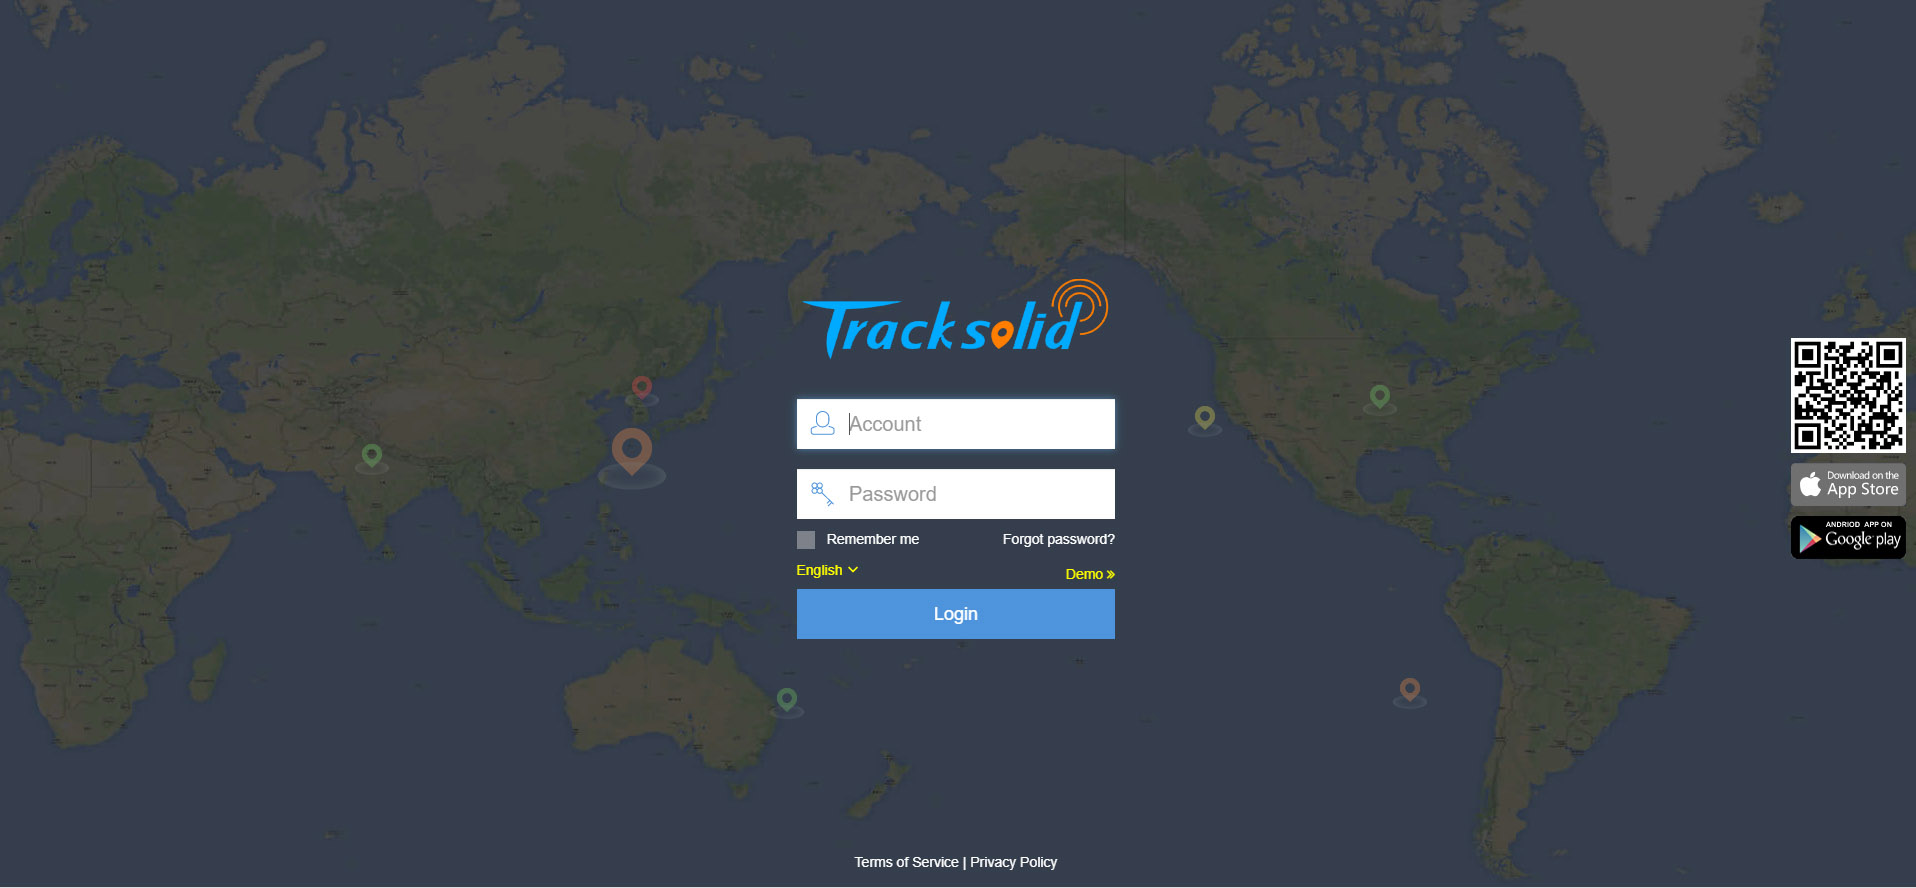 gps tracking tracksolid app software